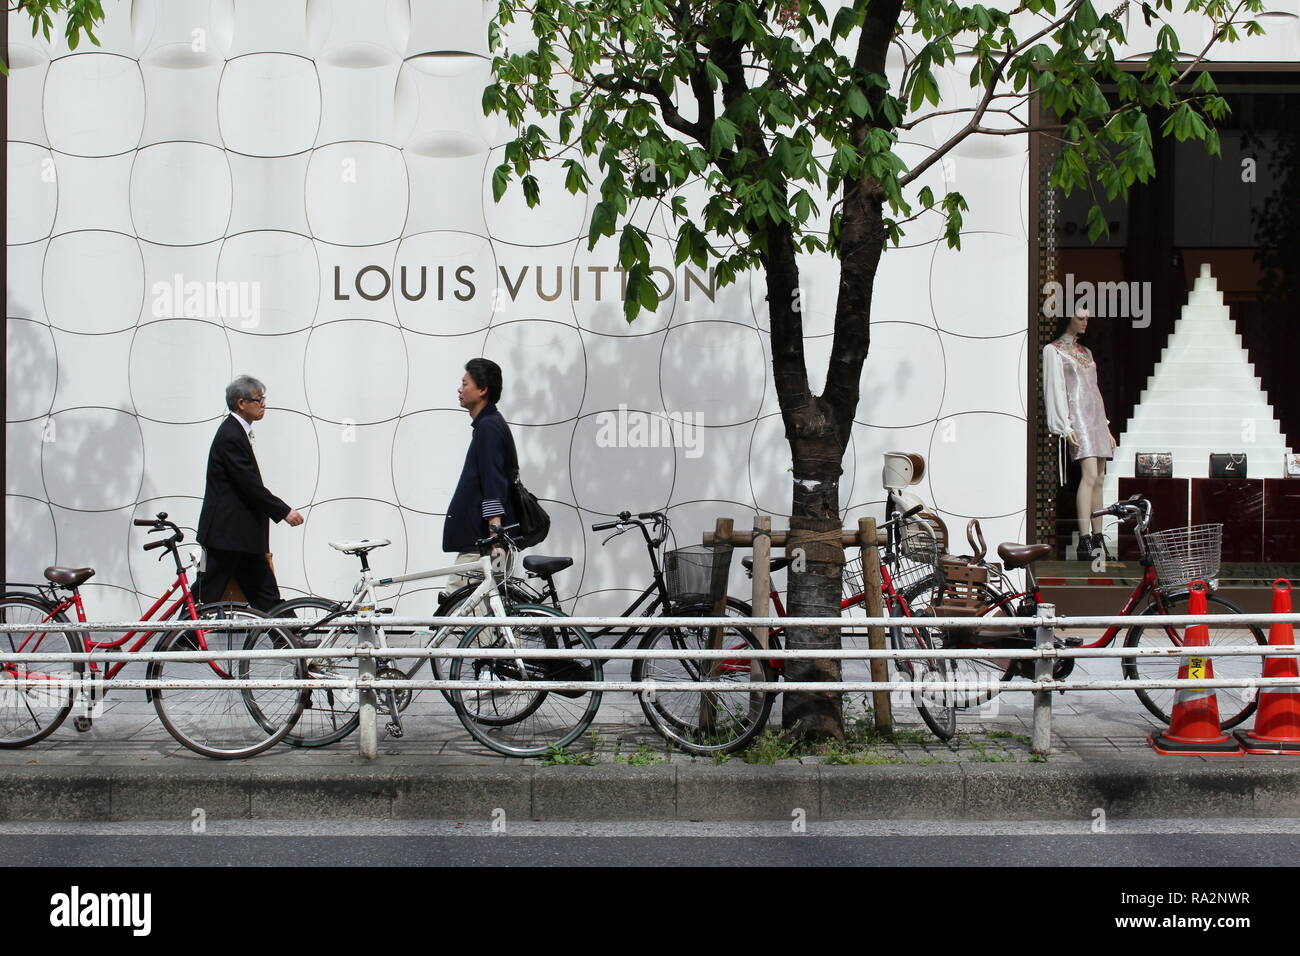 2019 Fun and Bold Window Display Rainbow Monogram Wallpaper Background at  the Louis Vuitton Flagship Store Editorial Photo - Image of celebration,  arrivals: 164509616